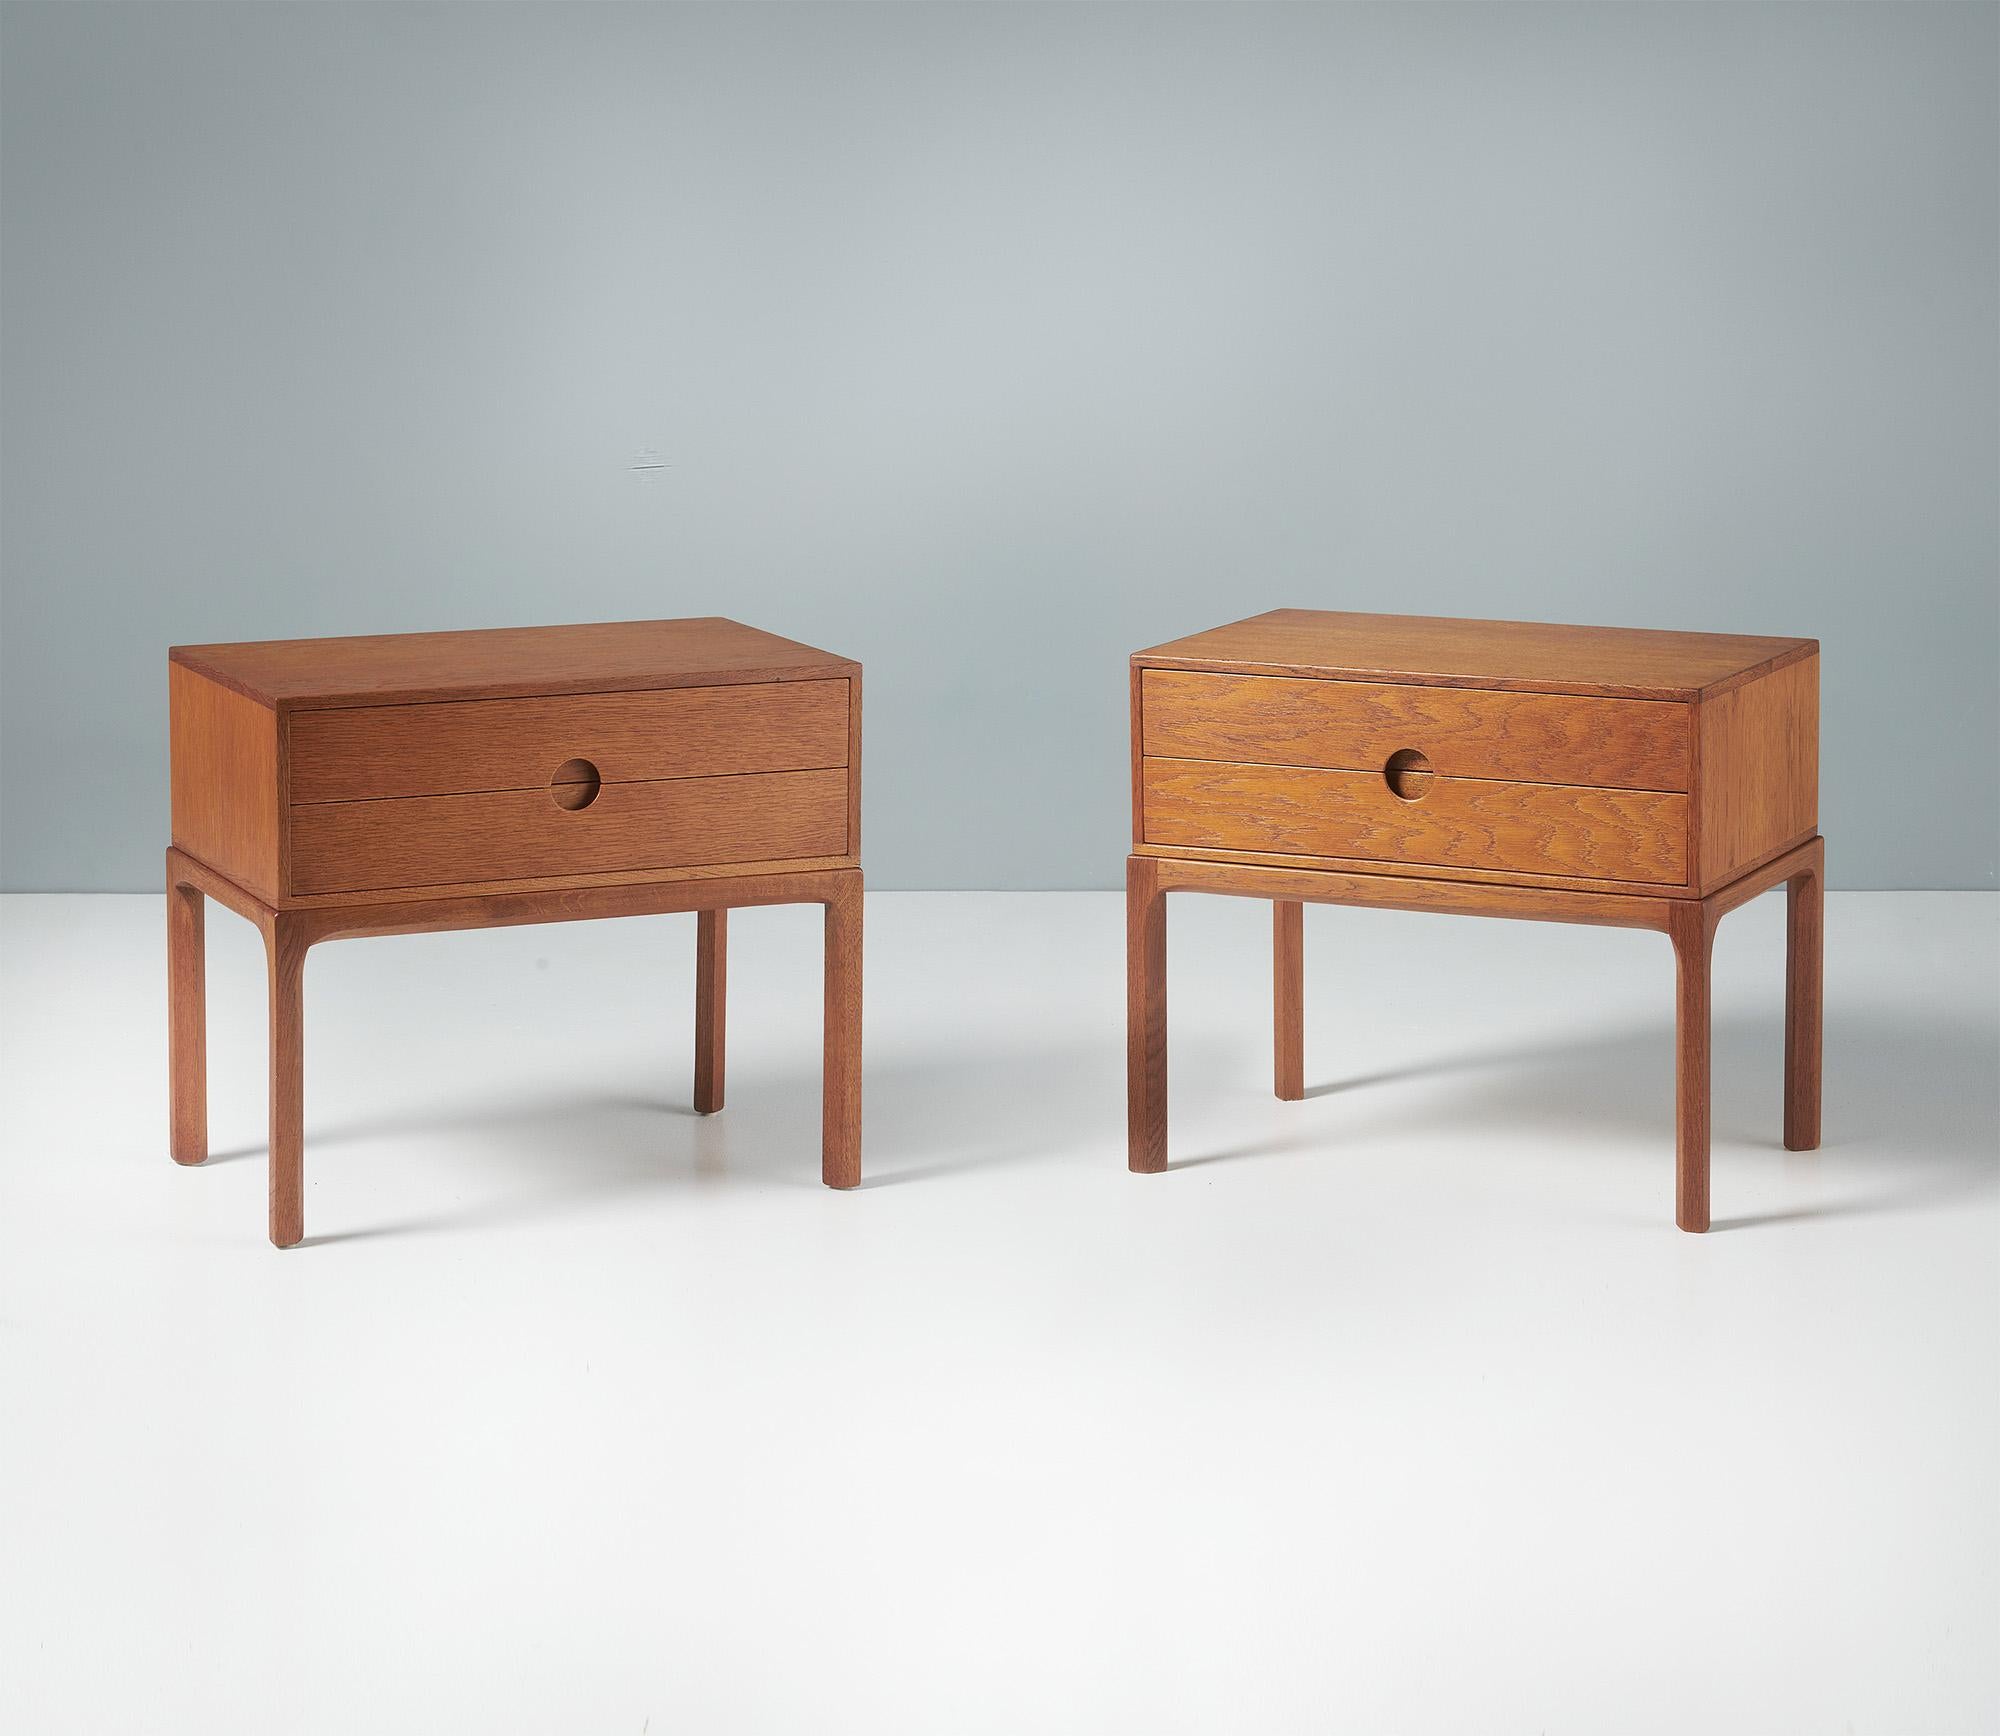 Kai Kristiansen - Bedside Cabinets, c1960s.

A pair of patinated oak bedside cabinets, produced by Aksel Kjersgaard in Odder, Denmark in the early 1960s. The design features Kristiansen’s trademark half-moon drawer pulls synonymous with this series.